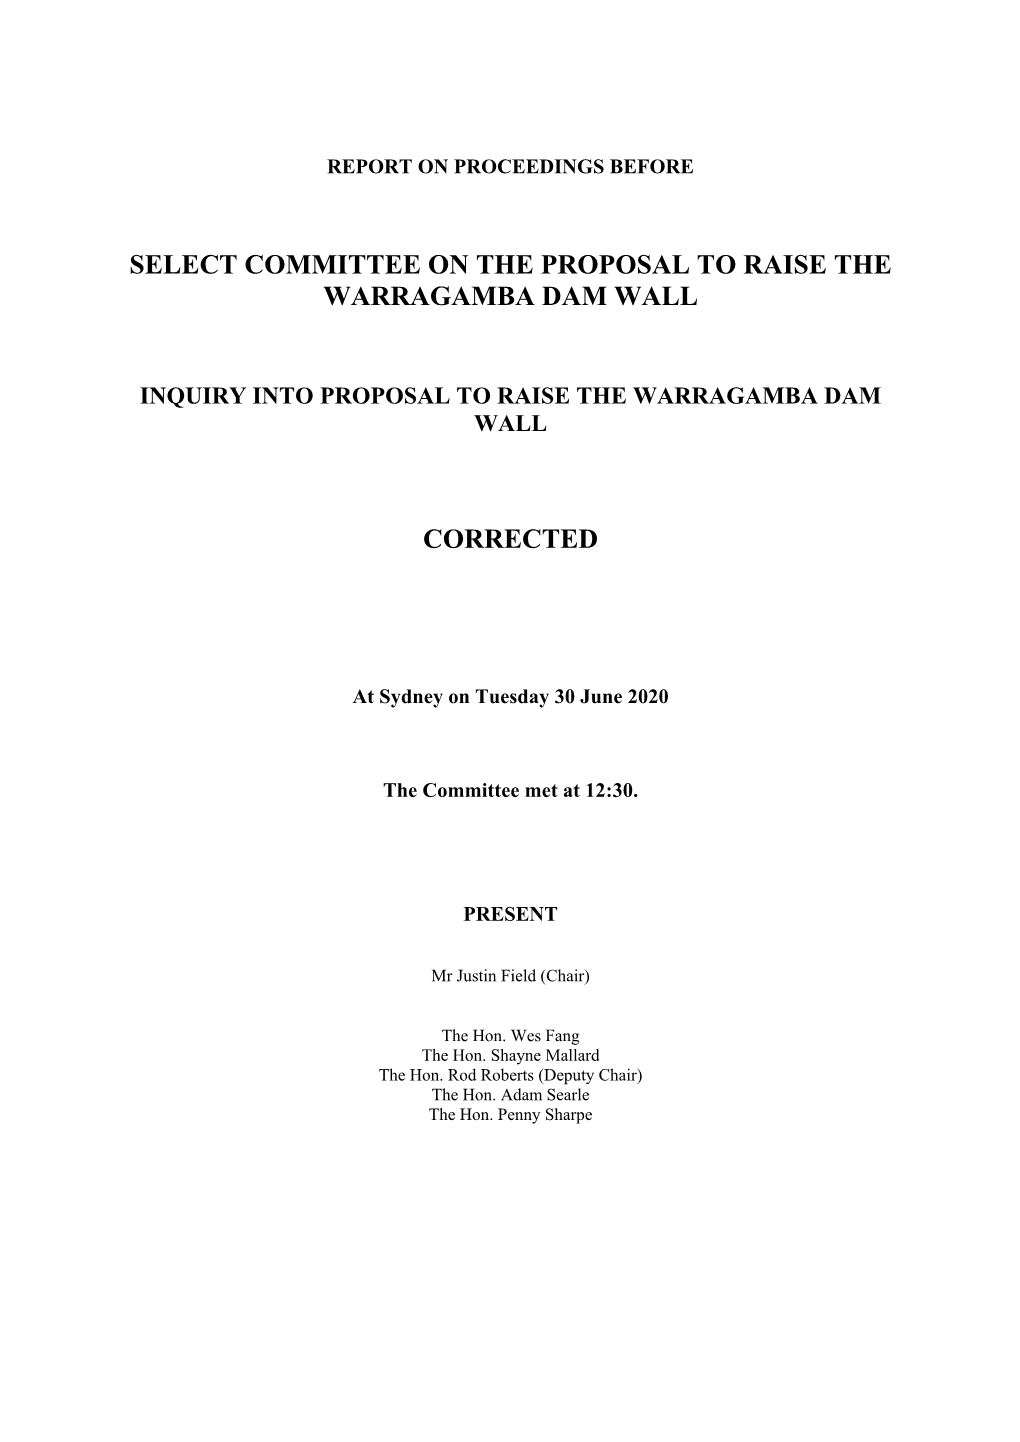 Select Committee on the Proposal to Raise the Warragamba Dam Wall